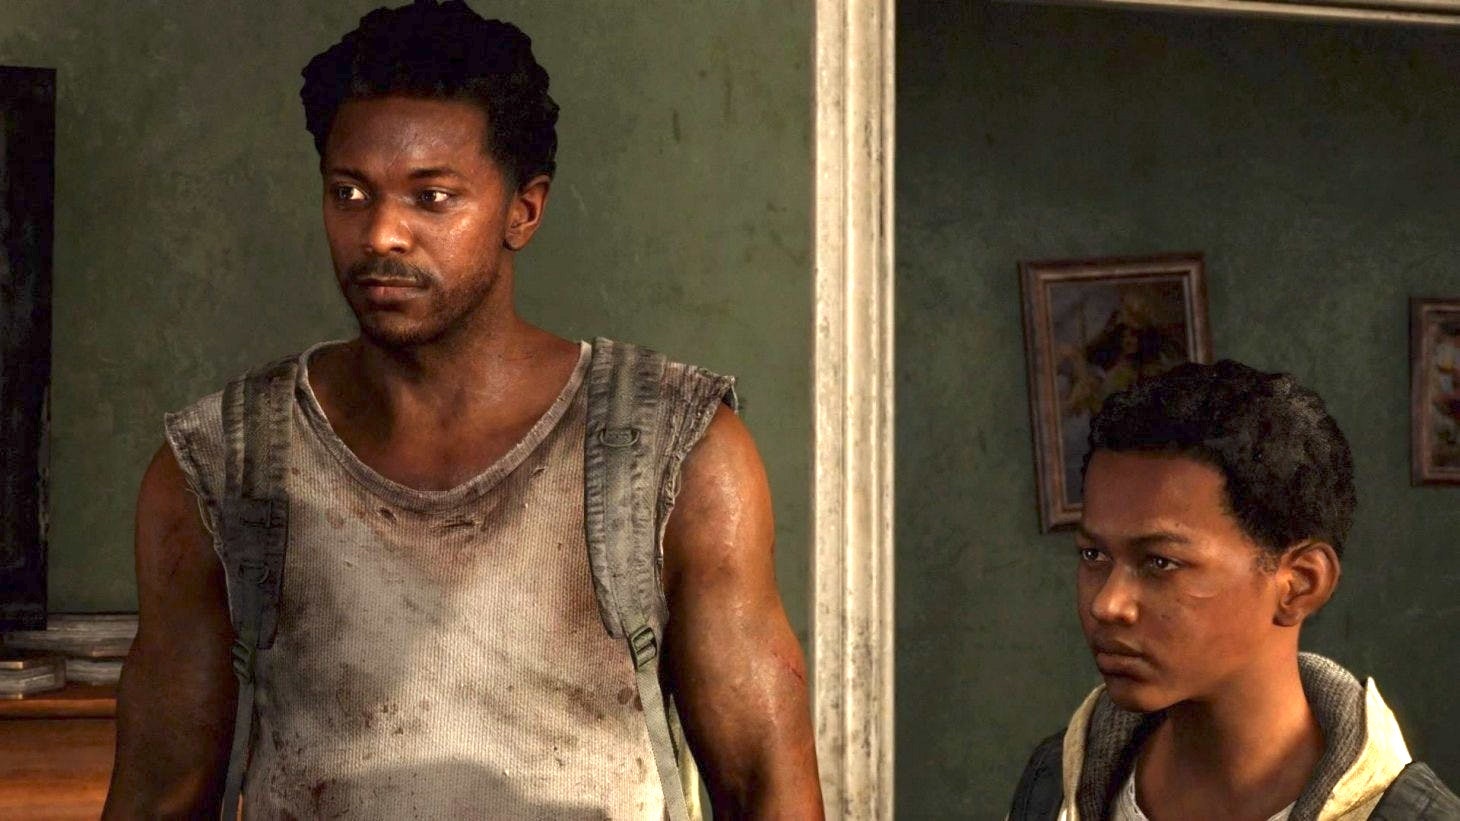 Explained: Who Are the New Characters in The Last of Us Episode 4